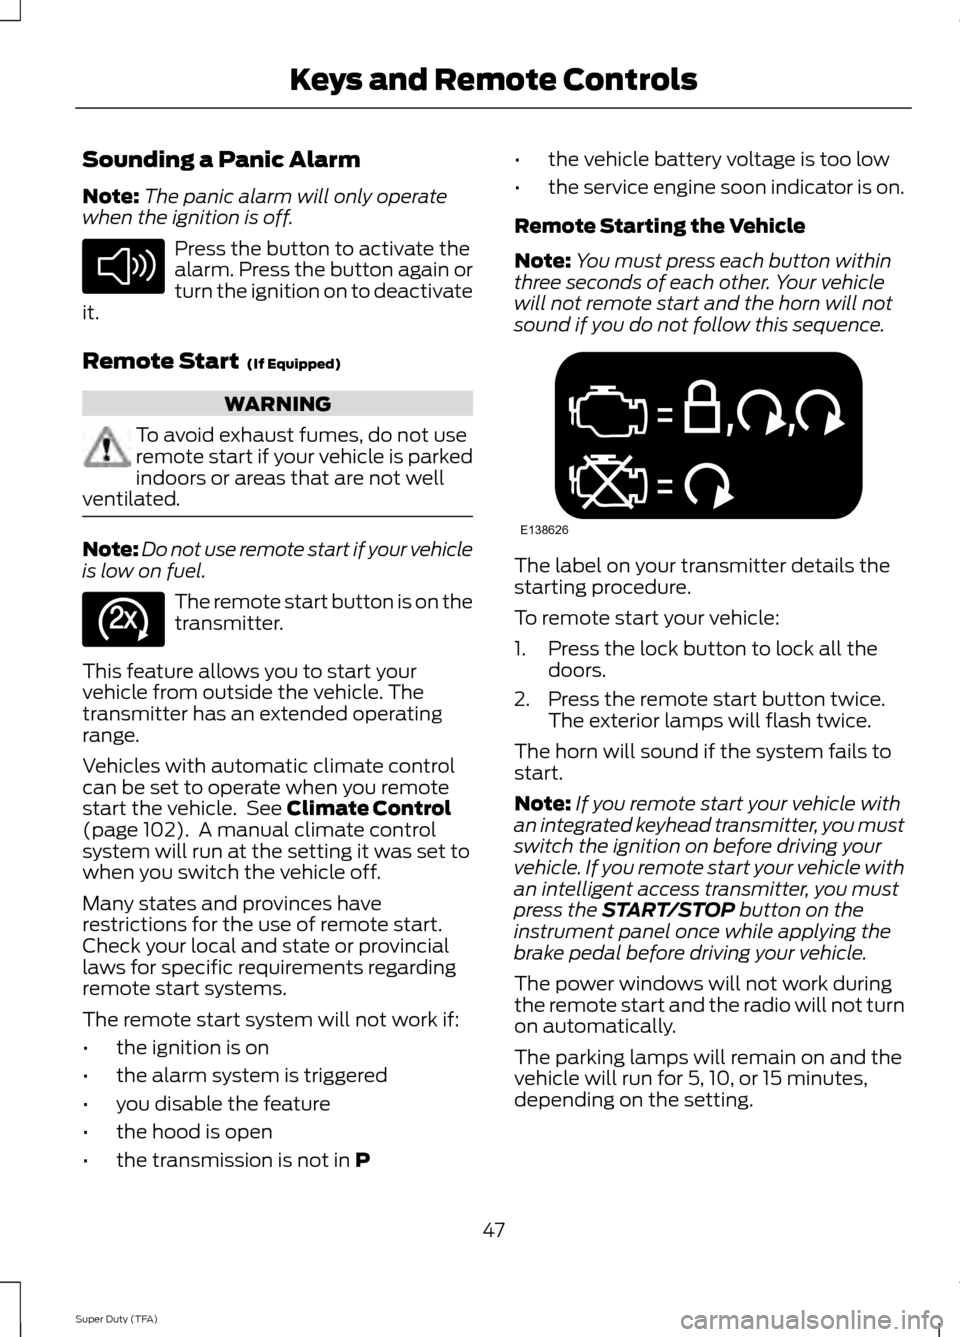 FORD SUPER DUTY 2014 3.G Owners Manual Sounding a Panic Alarm
Note:
The panic alarm will only operate
when the ignition is off. Press the button to activate the
alarm. Press the button again or
turn the ignition on to deactivate
it.
Remote